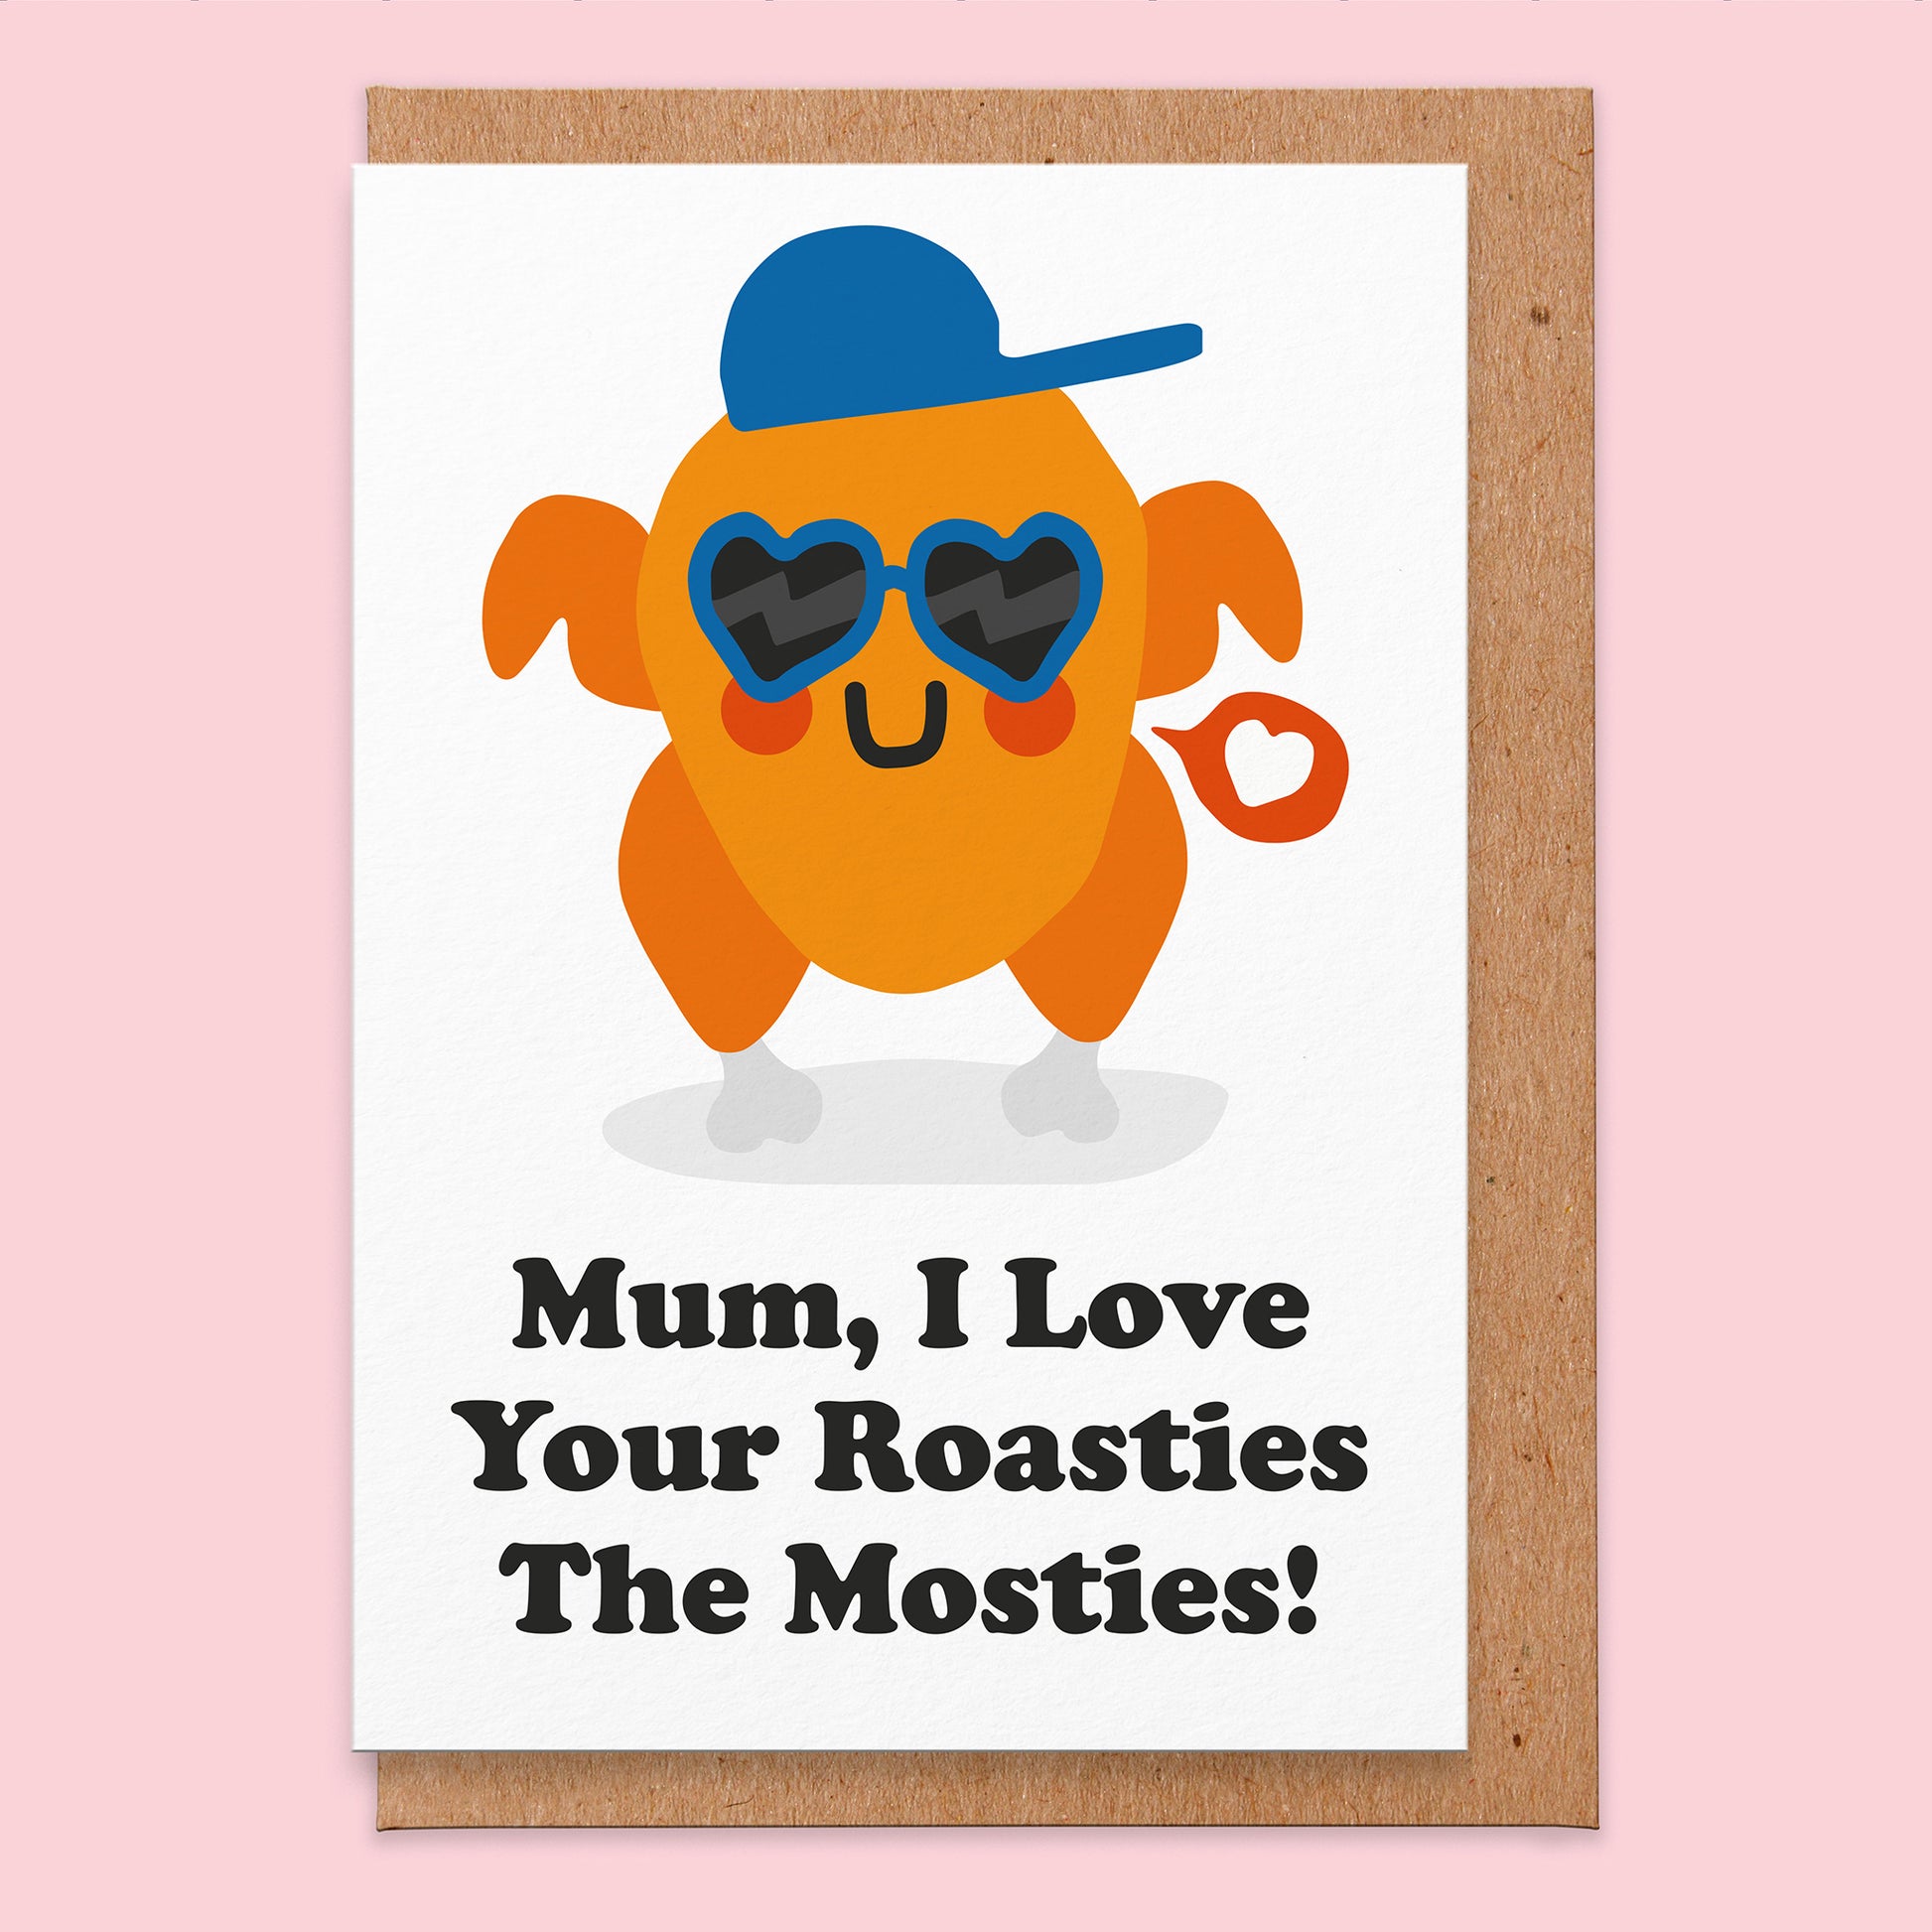 Greetings card that says Mum, I Love Your Roasties The Mosties! and has a illustration of a roast chicken smiling and wearing heart glasses